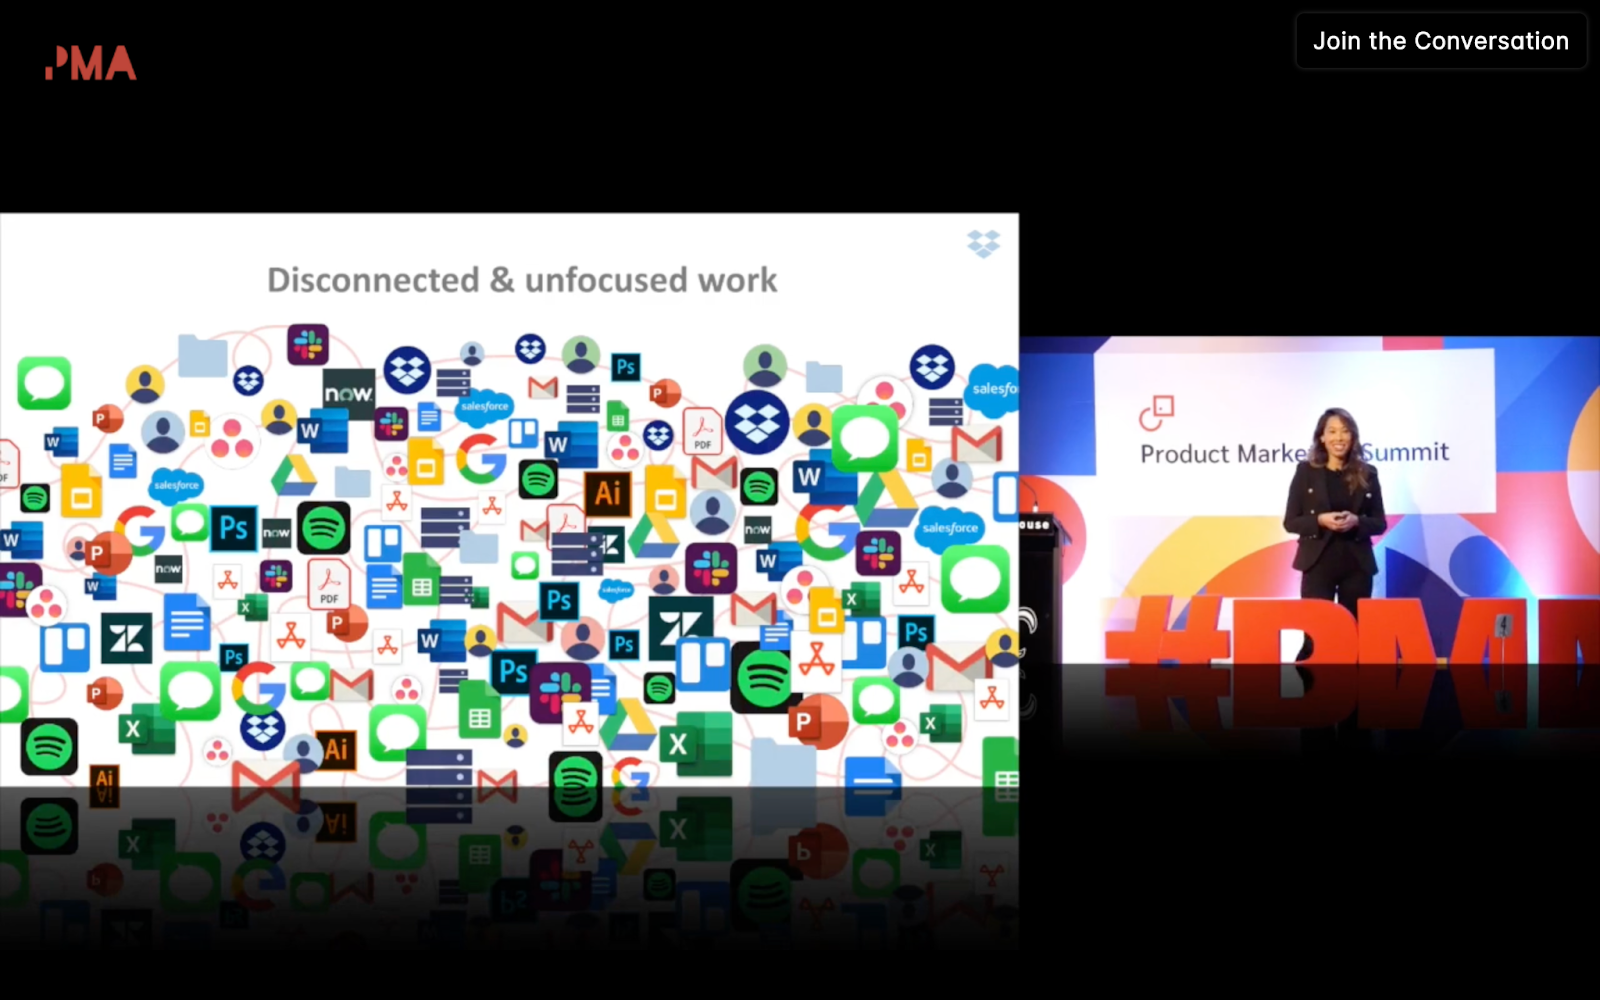 Image from the presentation of a jumble of logos looking chaotic and the title that says "Disconnected and unfocused work".